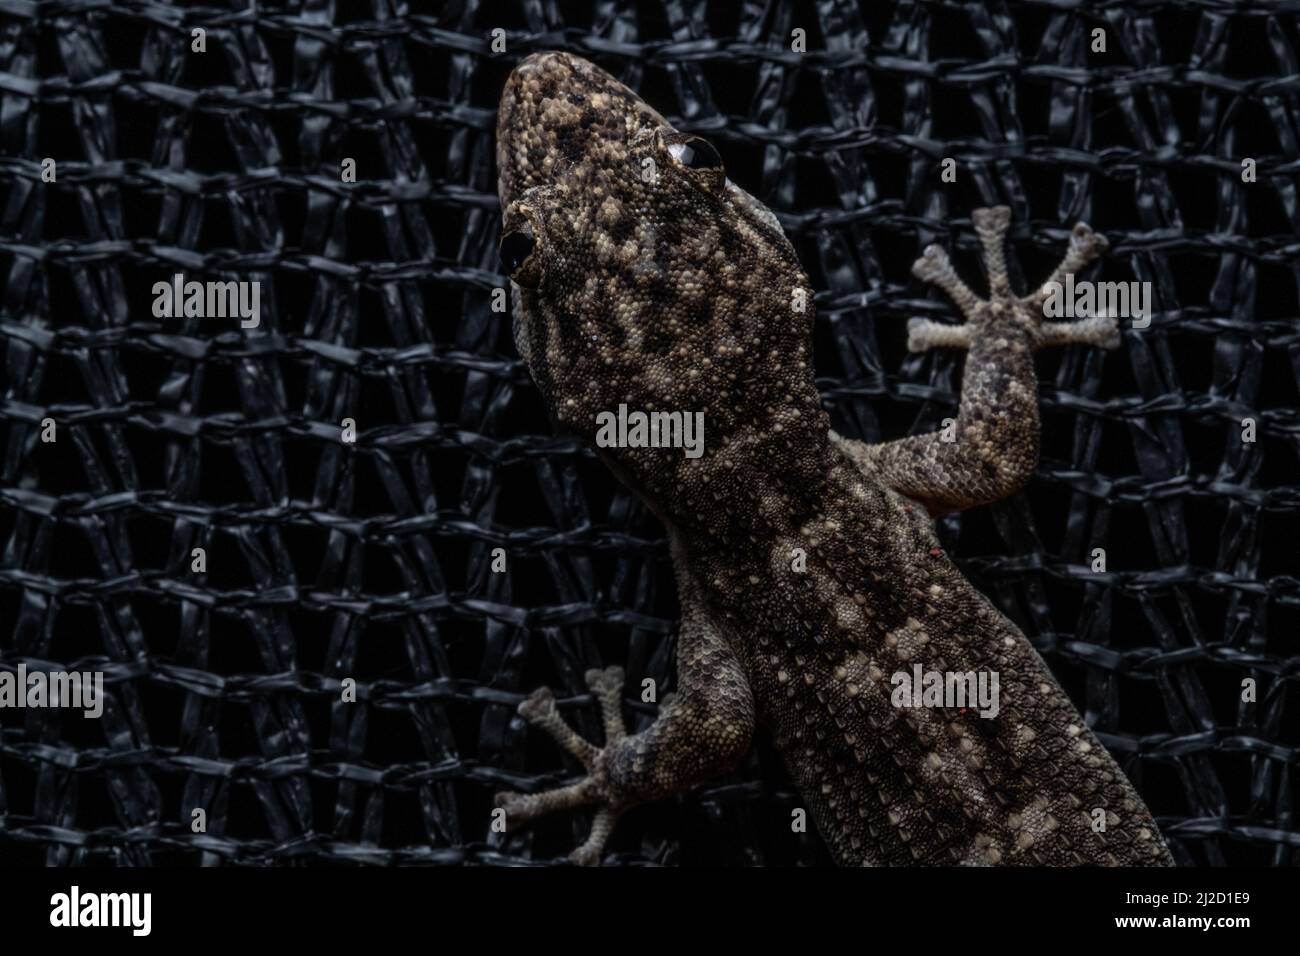 coastal leaf-toed gecko (Phyllodactylus reissii) climbs mesh netting in at the edge of dry forest in Ecuador. Stock Photo